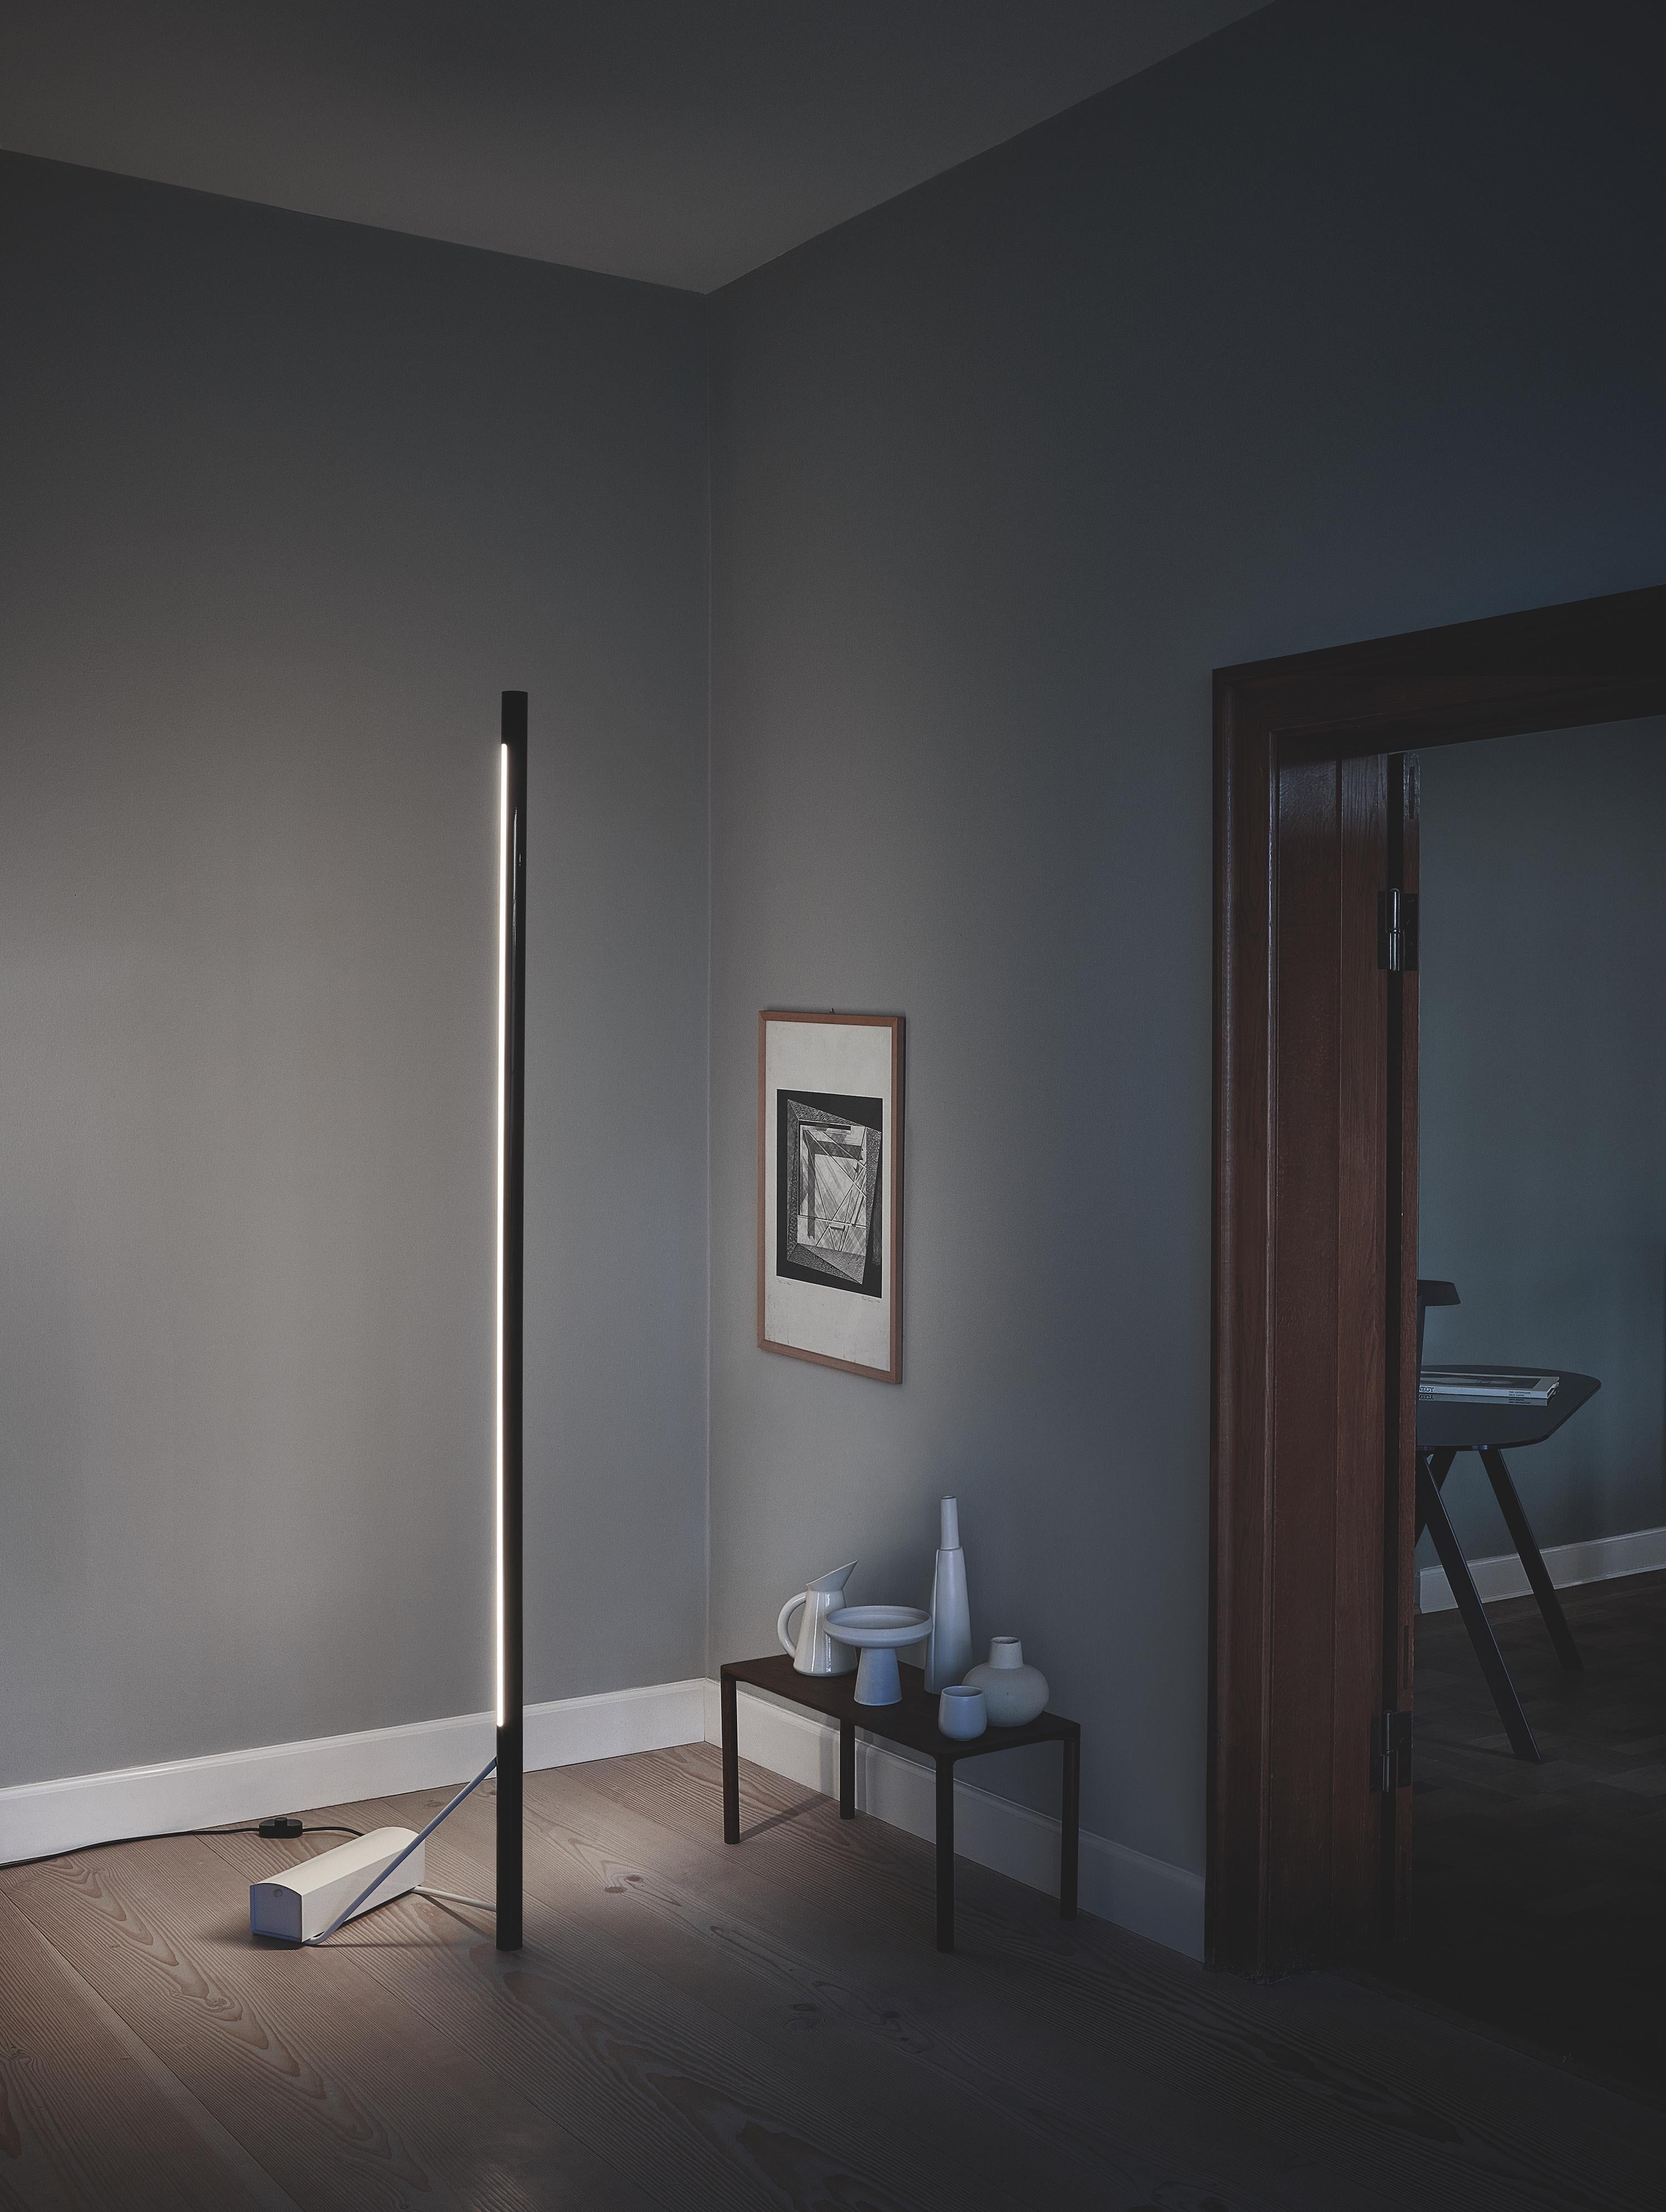 Gino Sarfatti model #1063 floor lamp in black and white for Flos / Astep. Designed in 1954, this is an authorized 2013 Astep/Flos re-edition by Alessandro Sarfatti, grandson of Gino Sarfatti, who applies his grandfather's scrupulous attention to